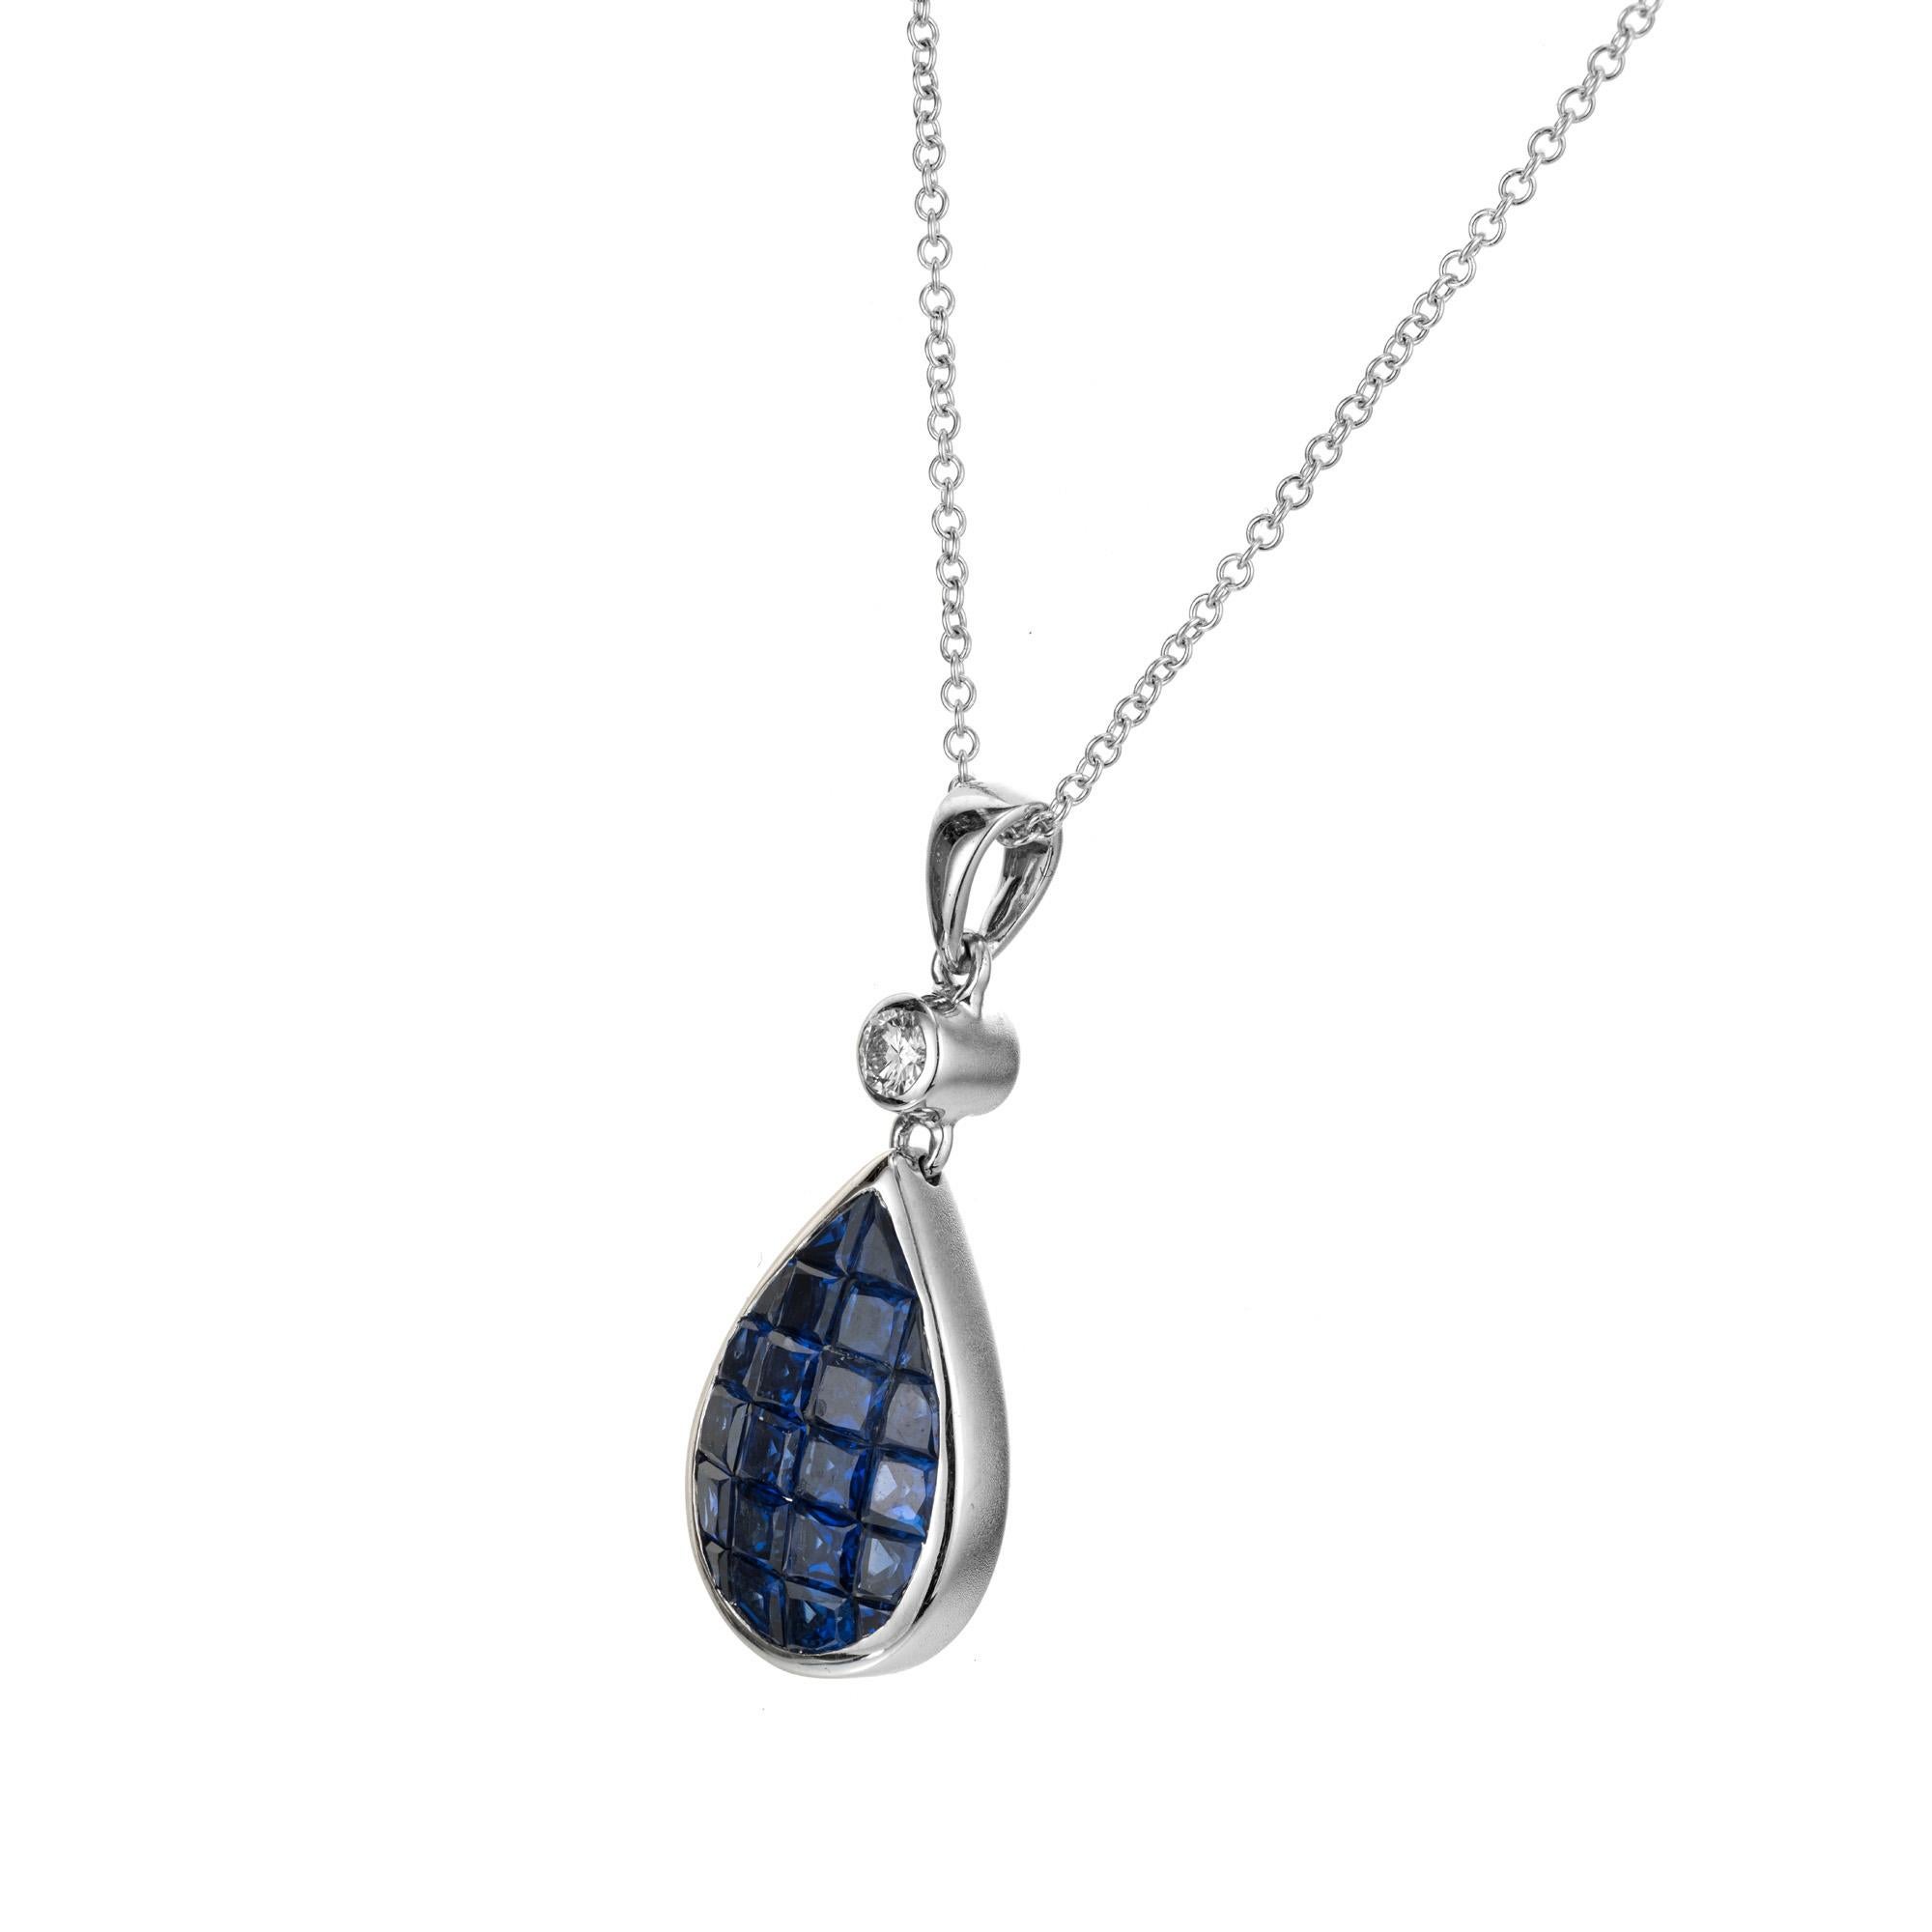 Sapphire and diamond pendant necklace. 22 calibre cut sapphires invisible set into a pear style 18k white gold bezel with one accent diamond on the bail. 16 inch 18k white gold chain.  The method of setting stones this way was invented by Van Clef